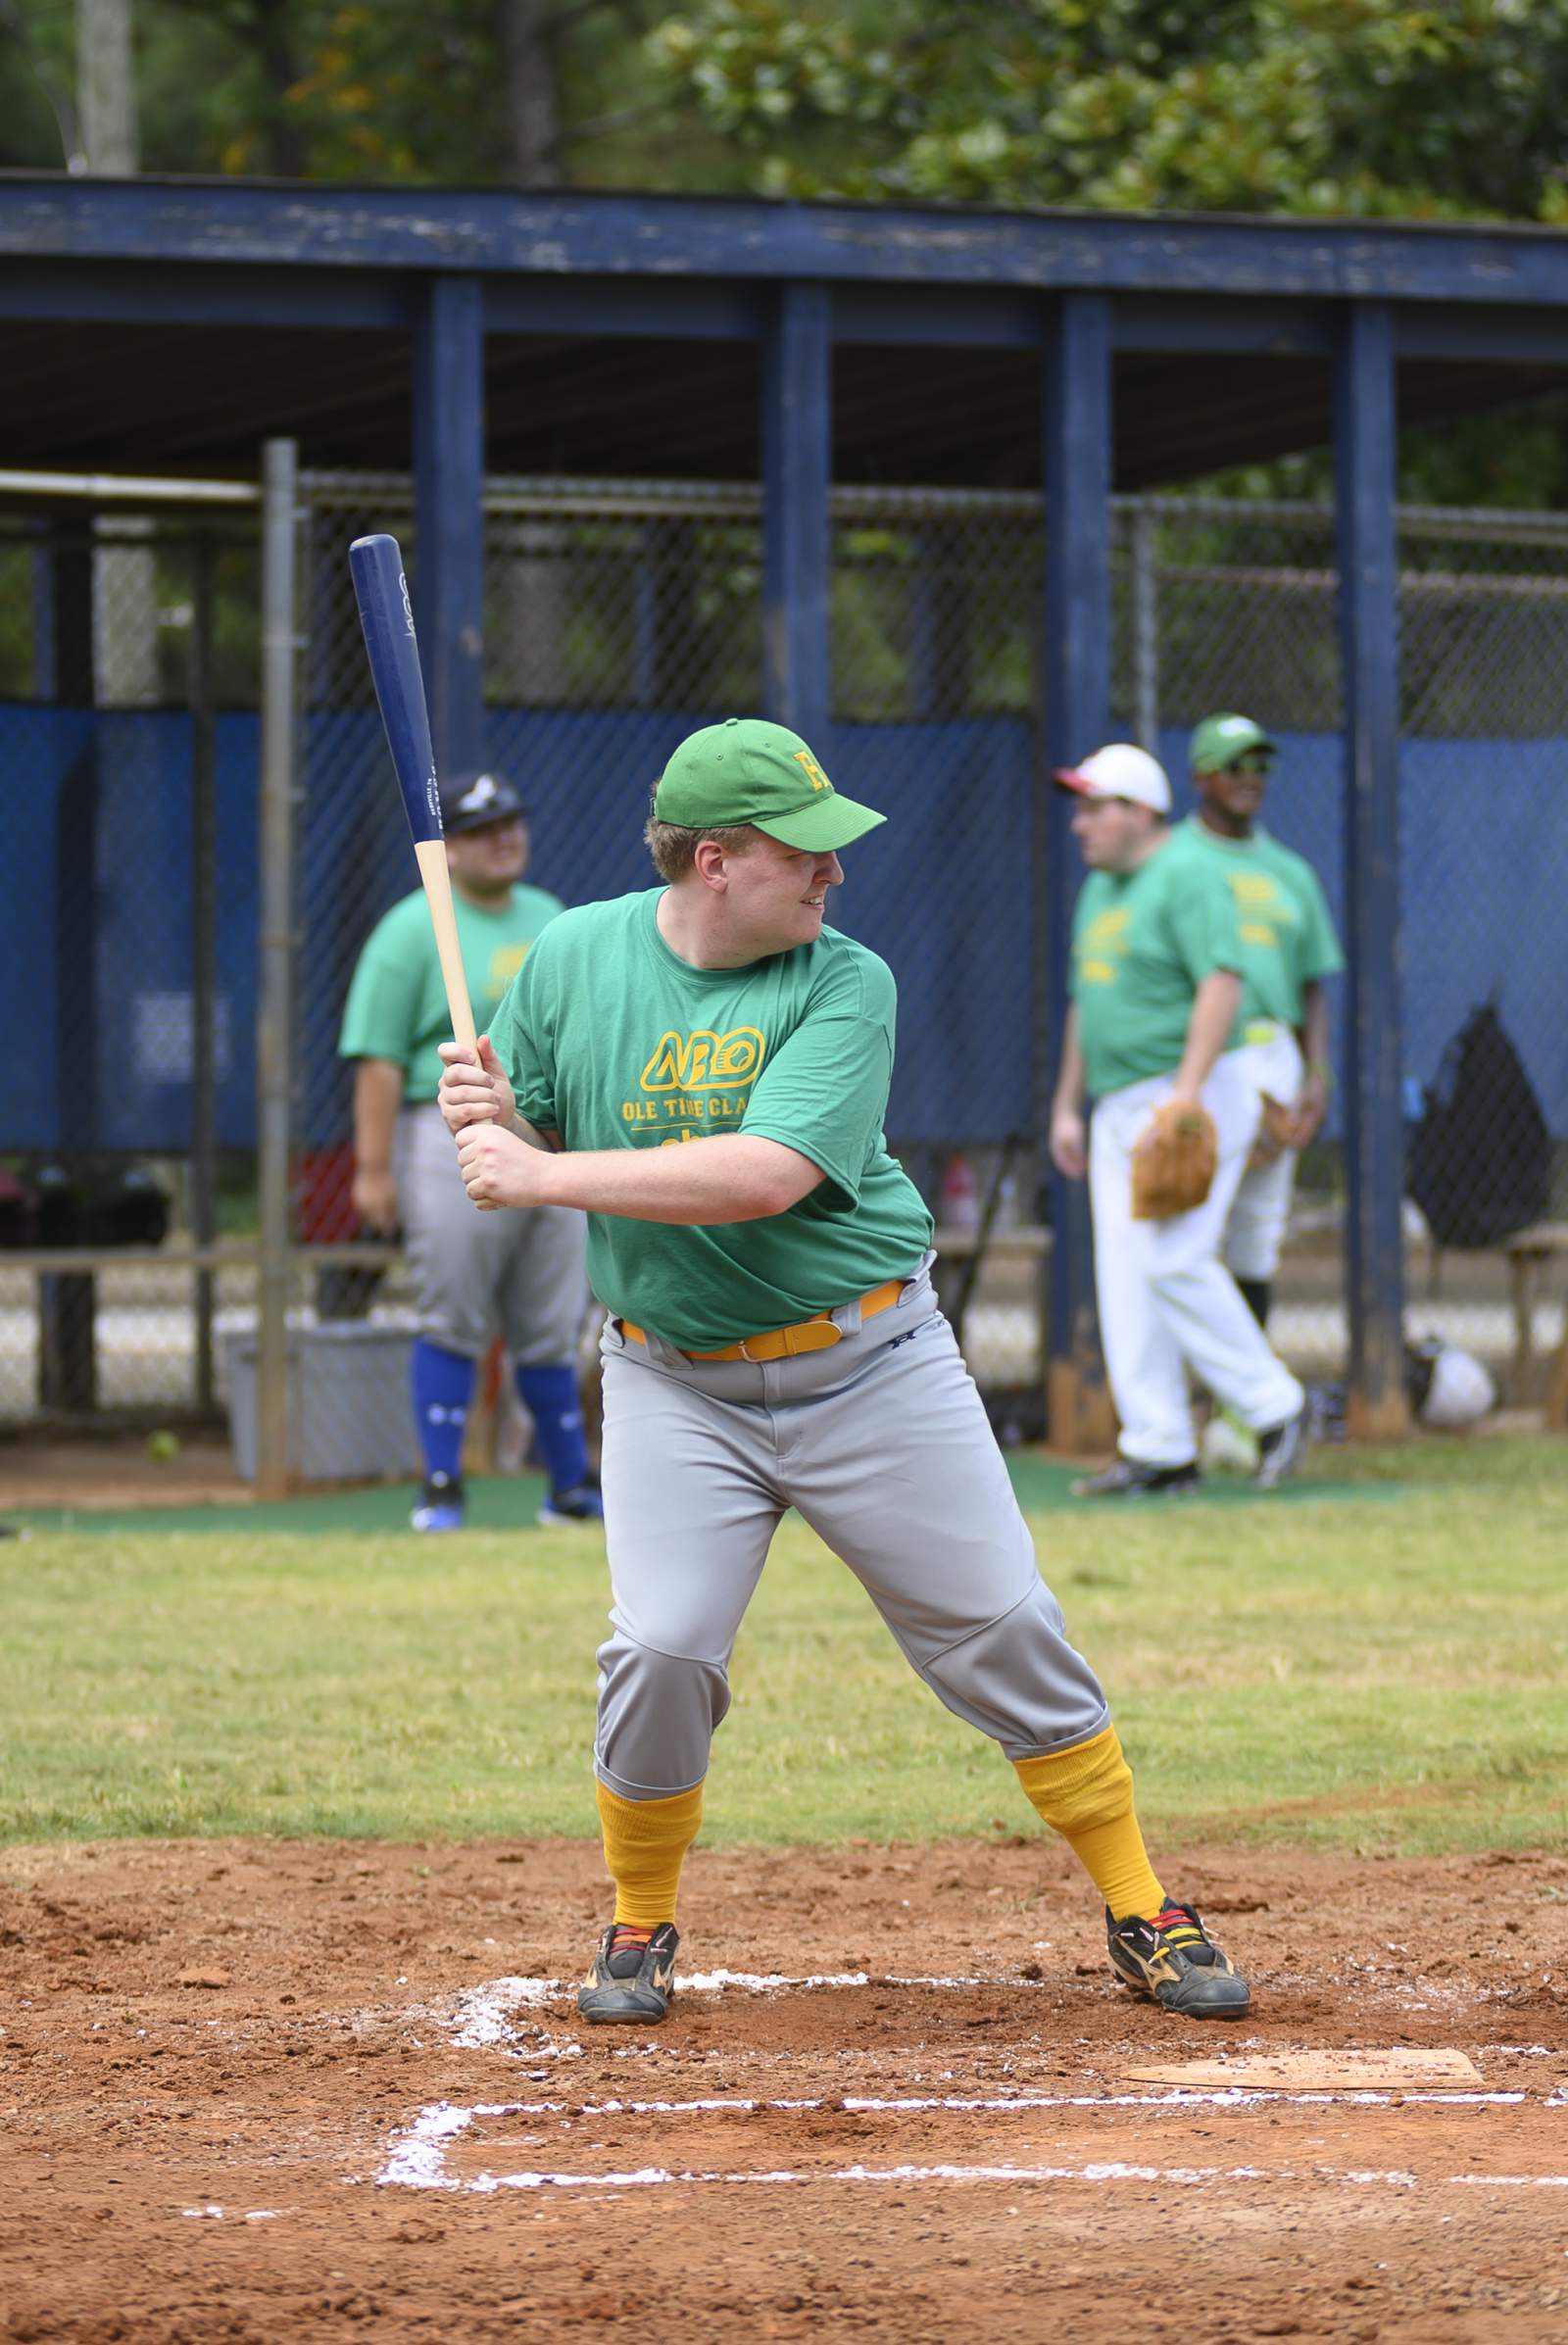 Man living with autism creates an inclusive baseball league